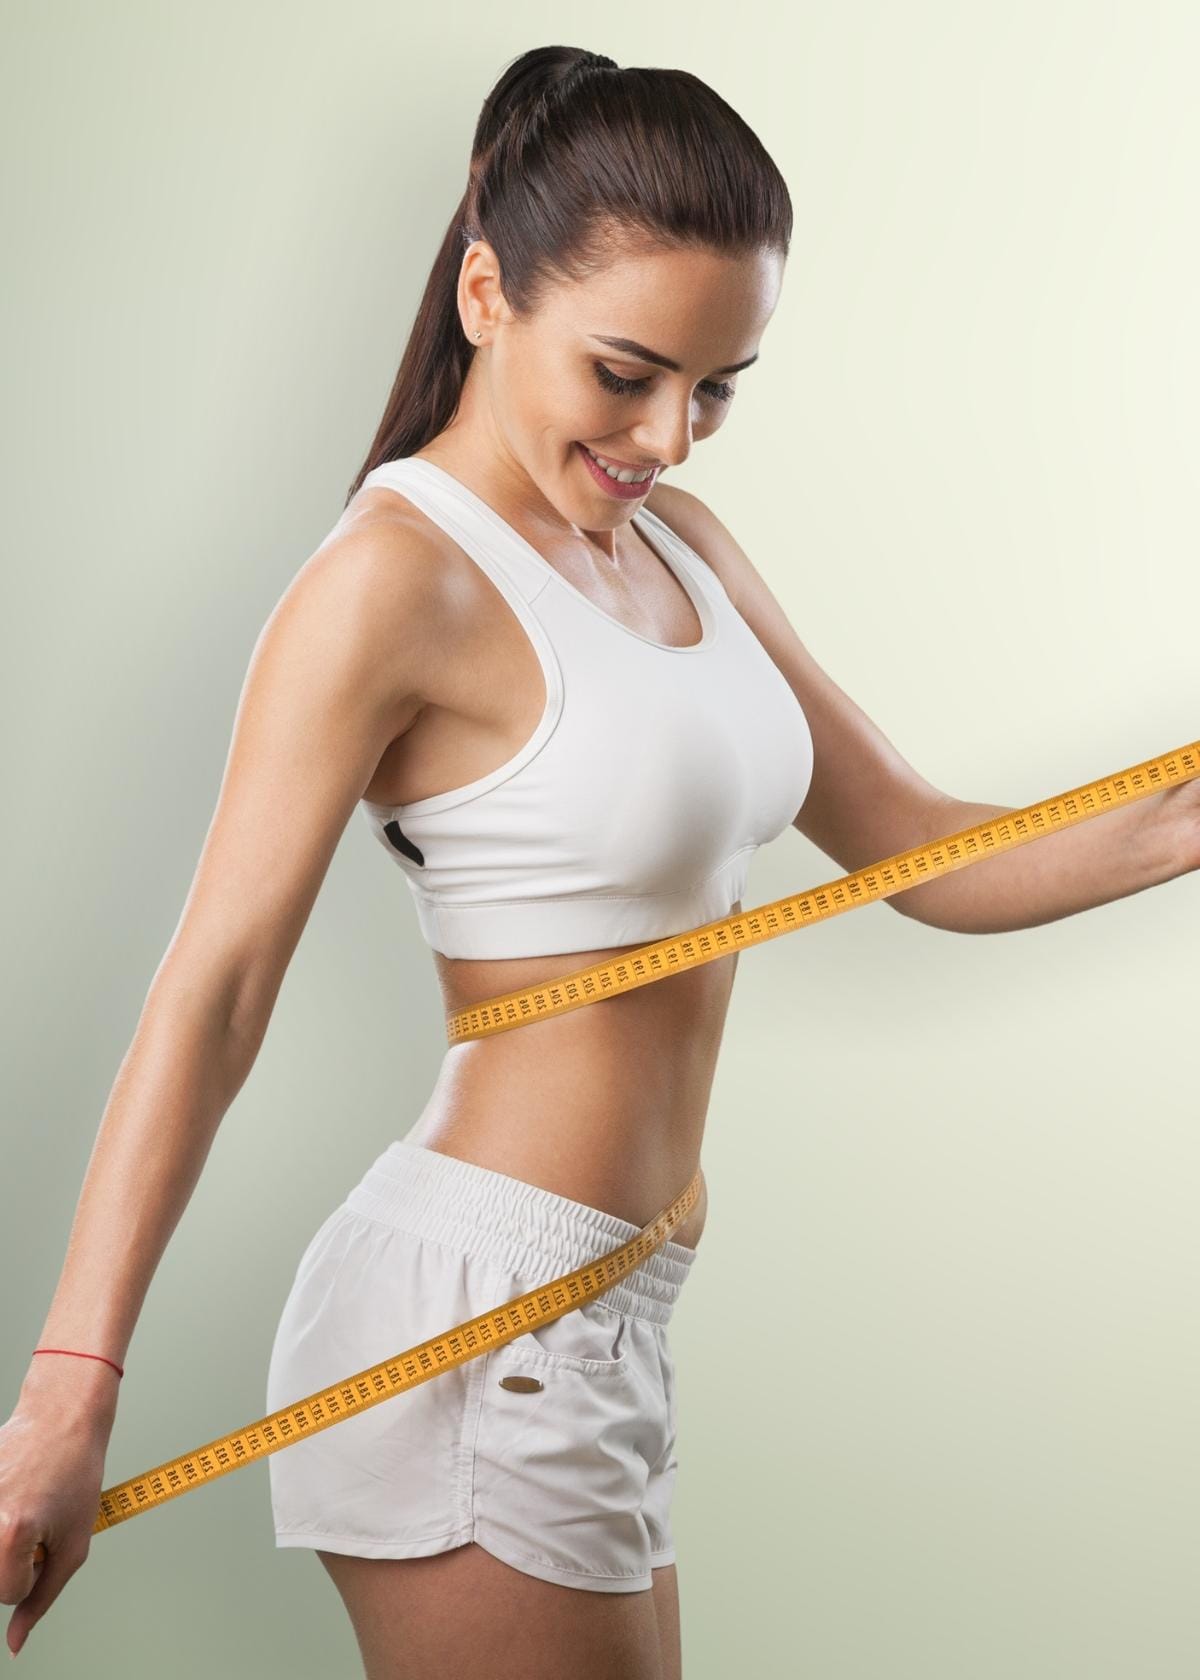 Best Skin Tightening Treatment for Stomach: Non-Surgical Ways